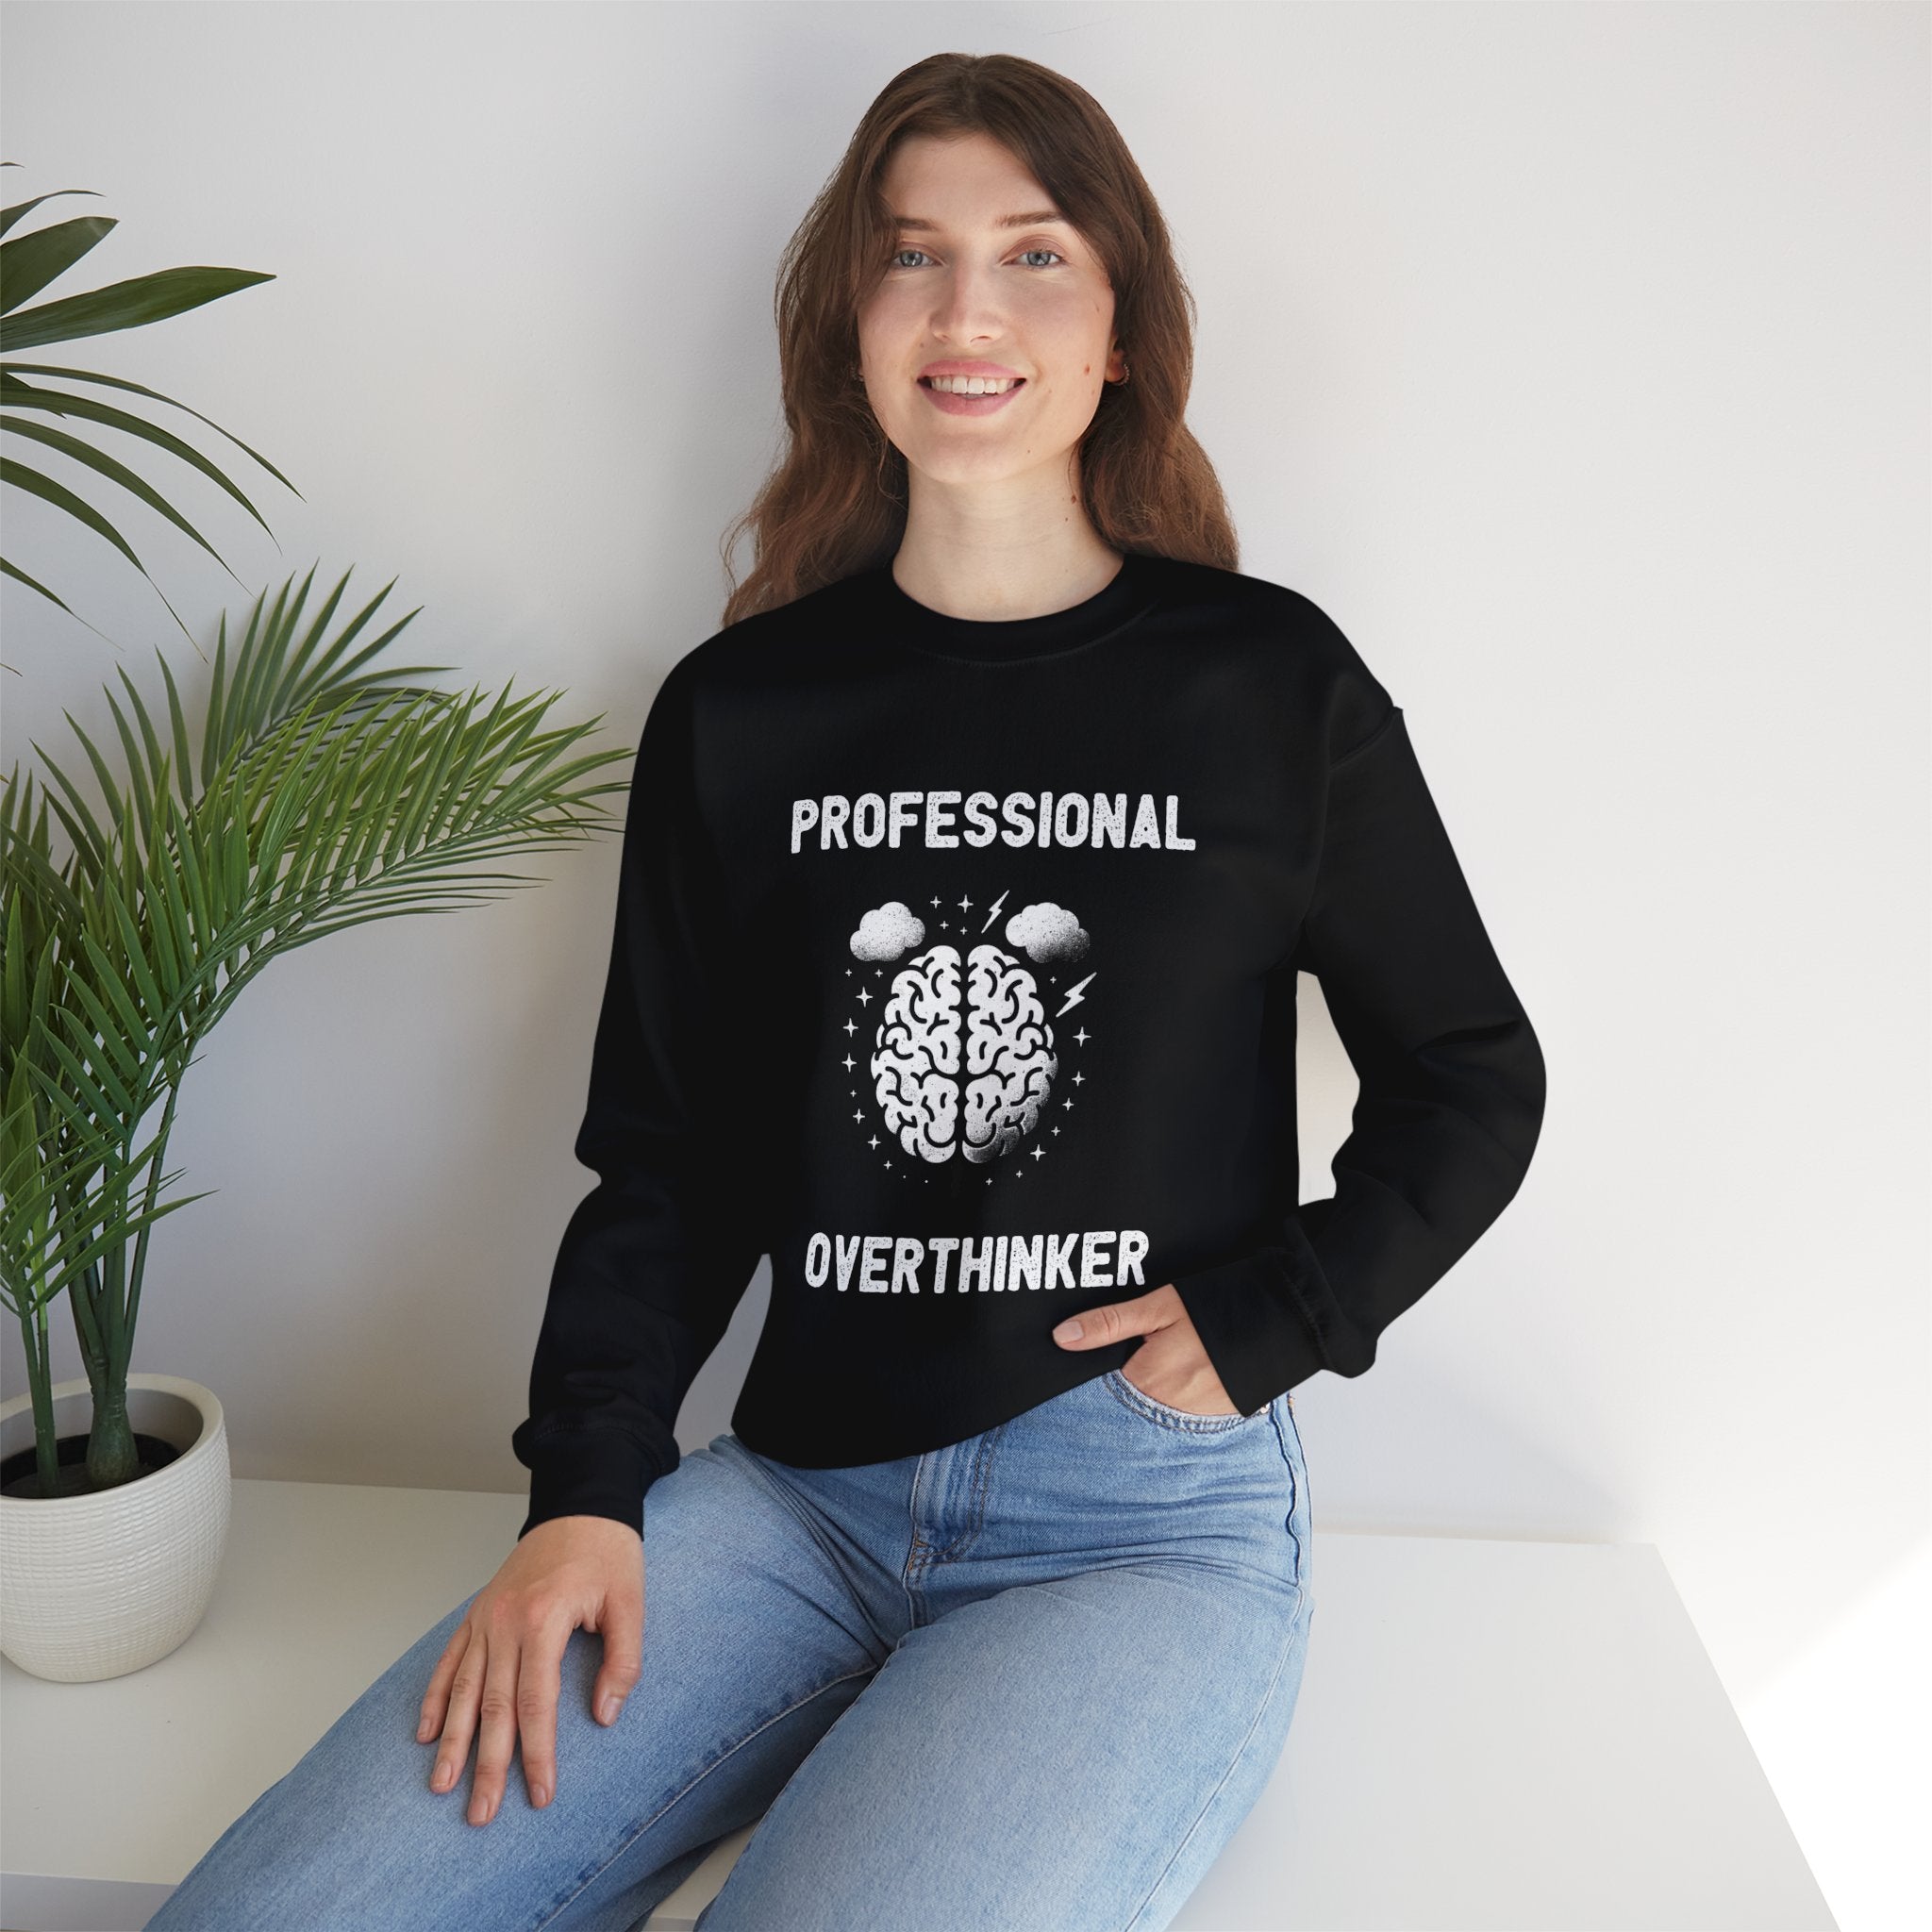 A person smiles while sitting next to a plant, wearing a cozy "Professional Overthinker - Sweatshirt" with an illustrated brain on the front, perfect for overthinking sessions during the cold months.